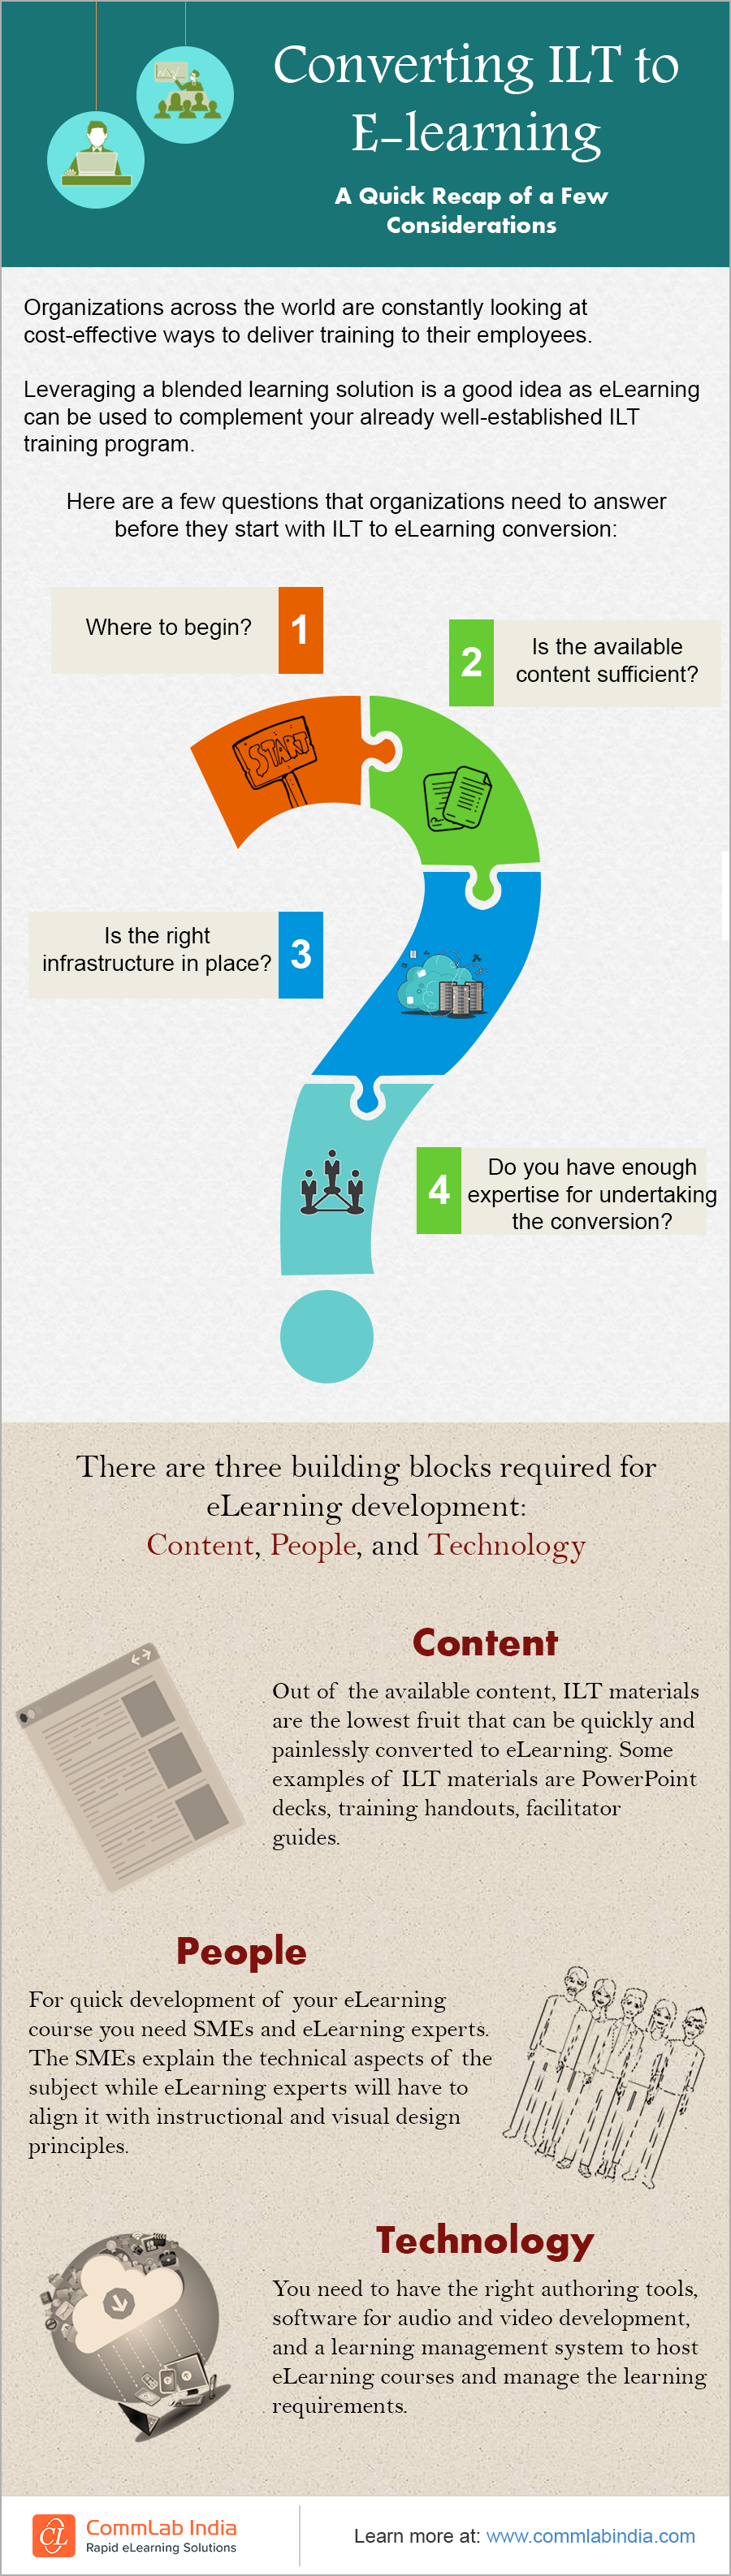 Converting ILT to eLearning: A Quick Recap of A Few Considerations [Infographic]